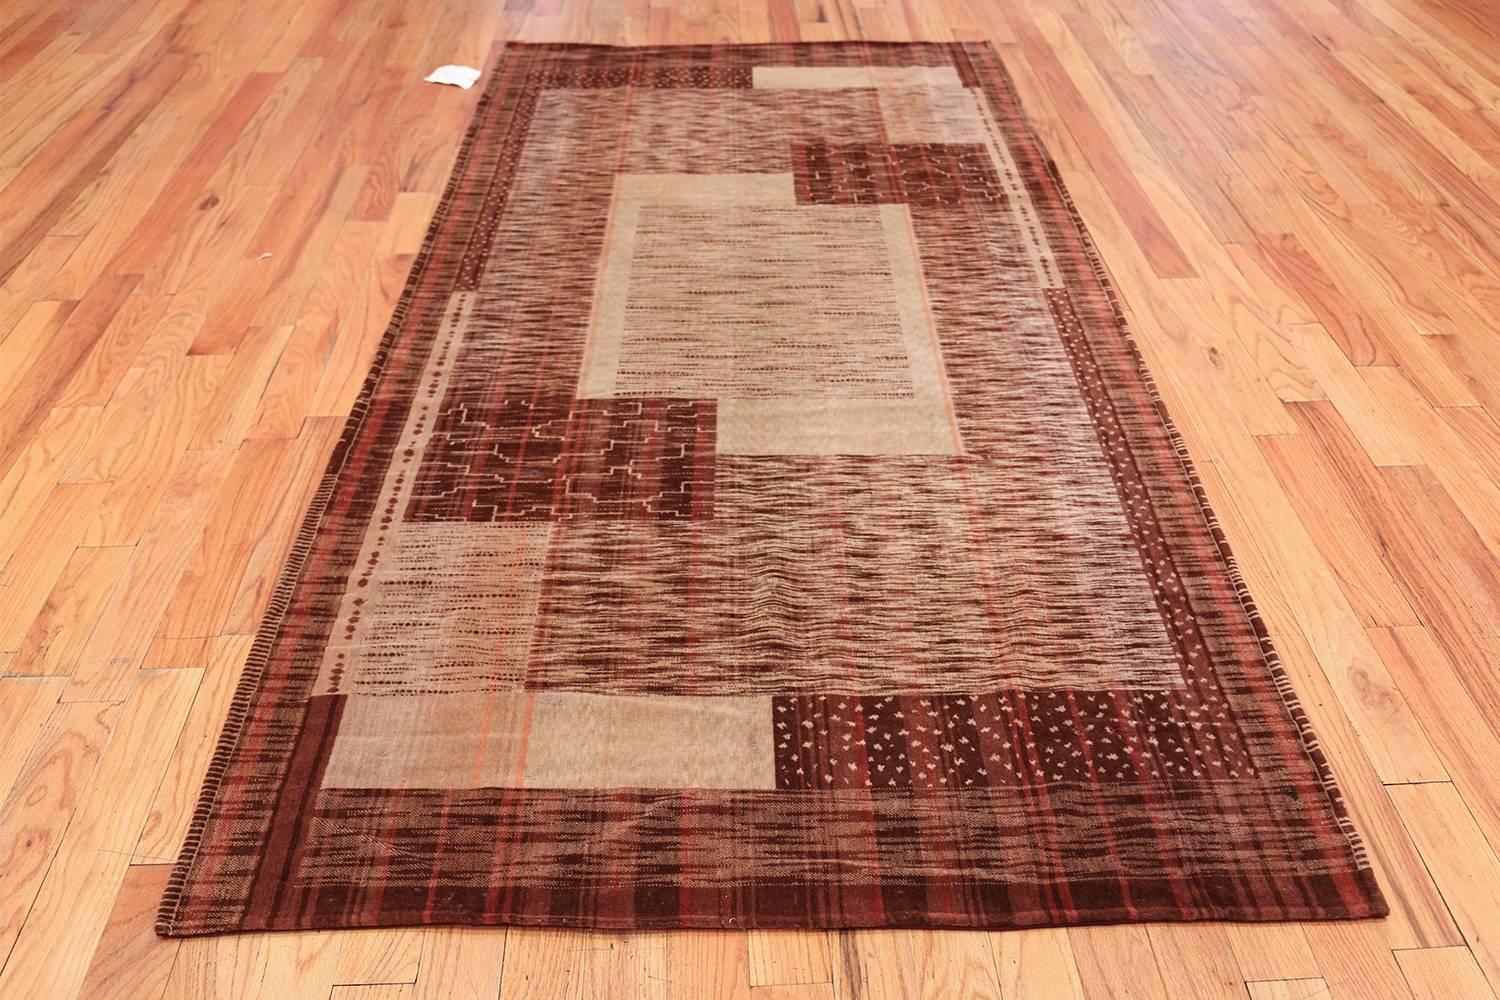 Vintage French Art Deco Rug. Size: 4 ft x 9 ft (1.22 m x 2.74 m) 2